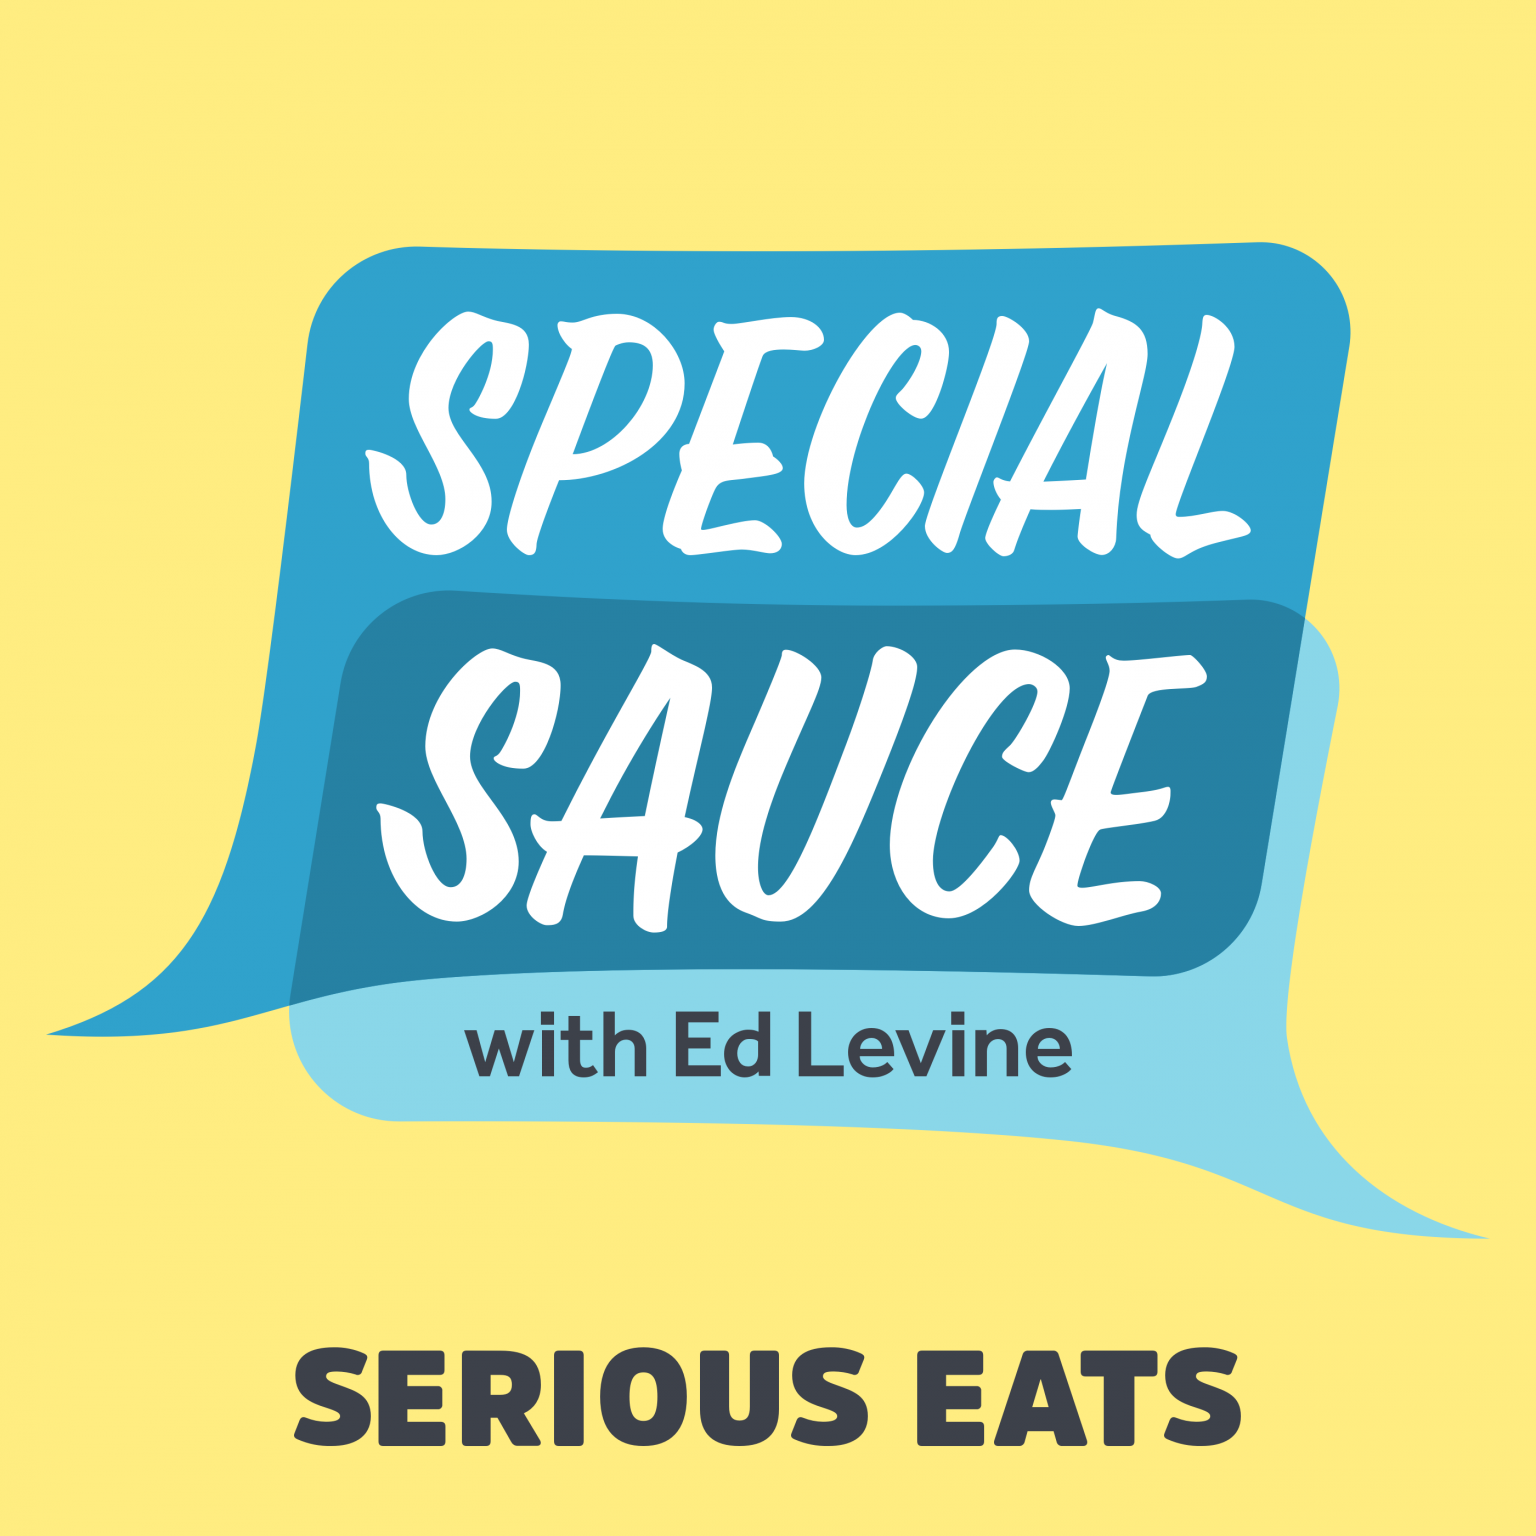 Special Sauce: Matt Rodbard and Max Falkowitz on What’s Next in Food Media [2/2]